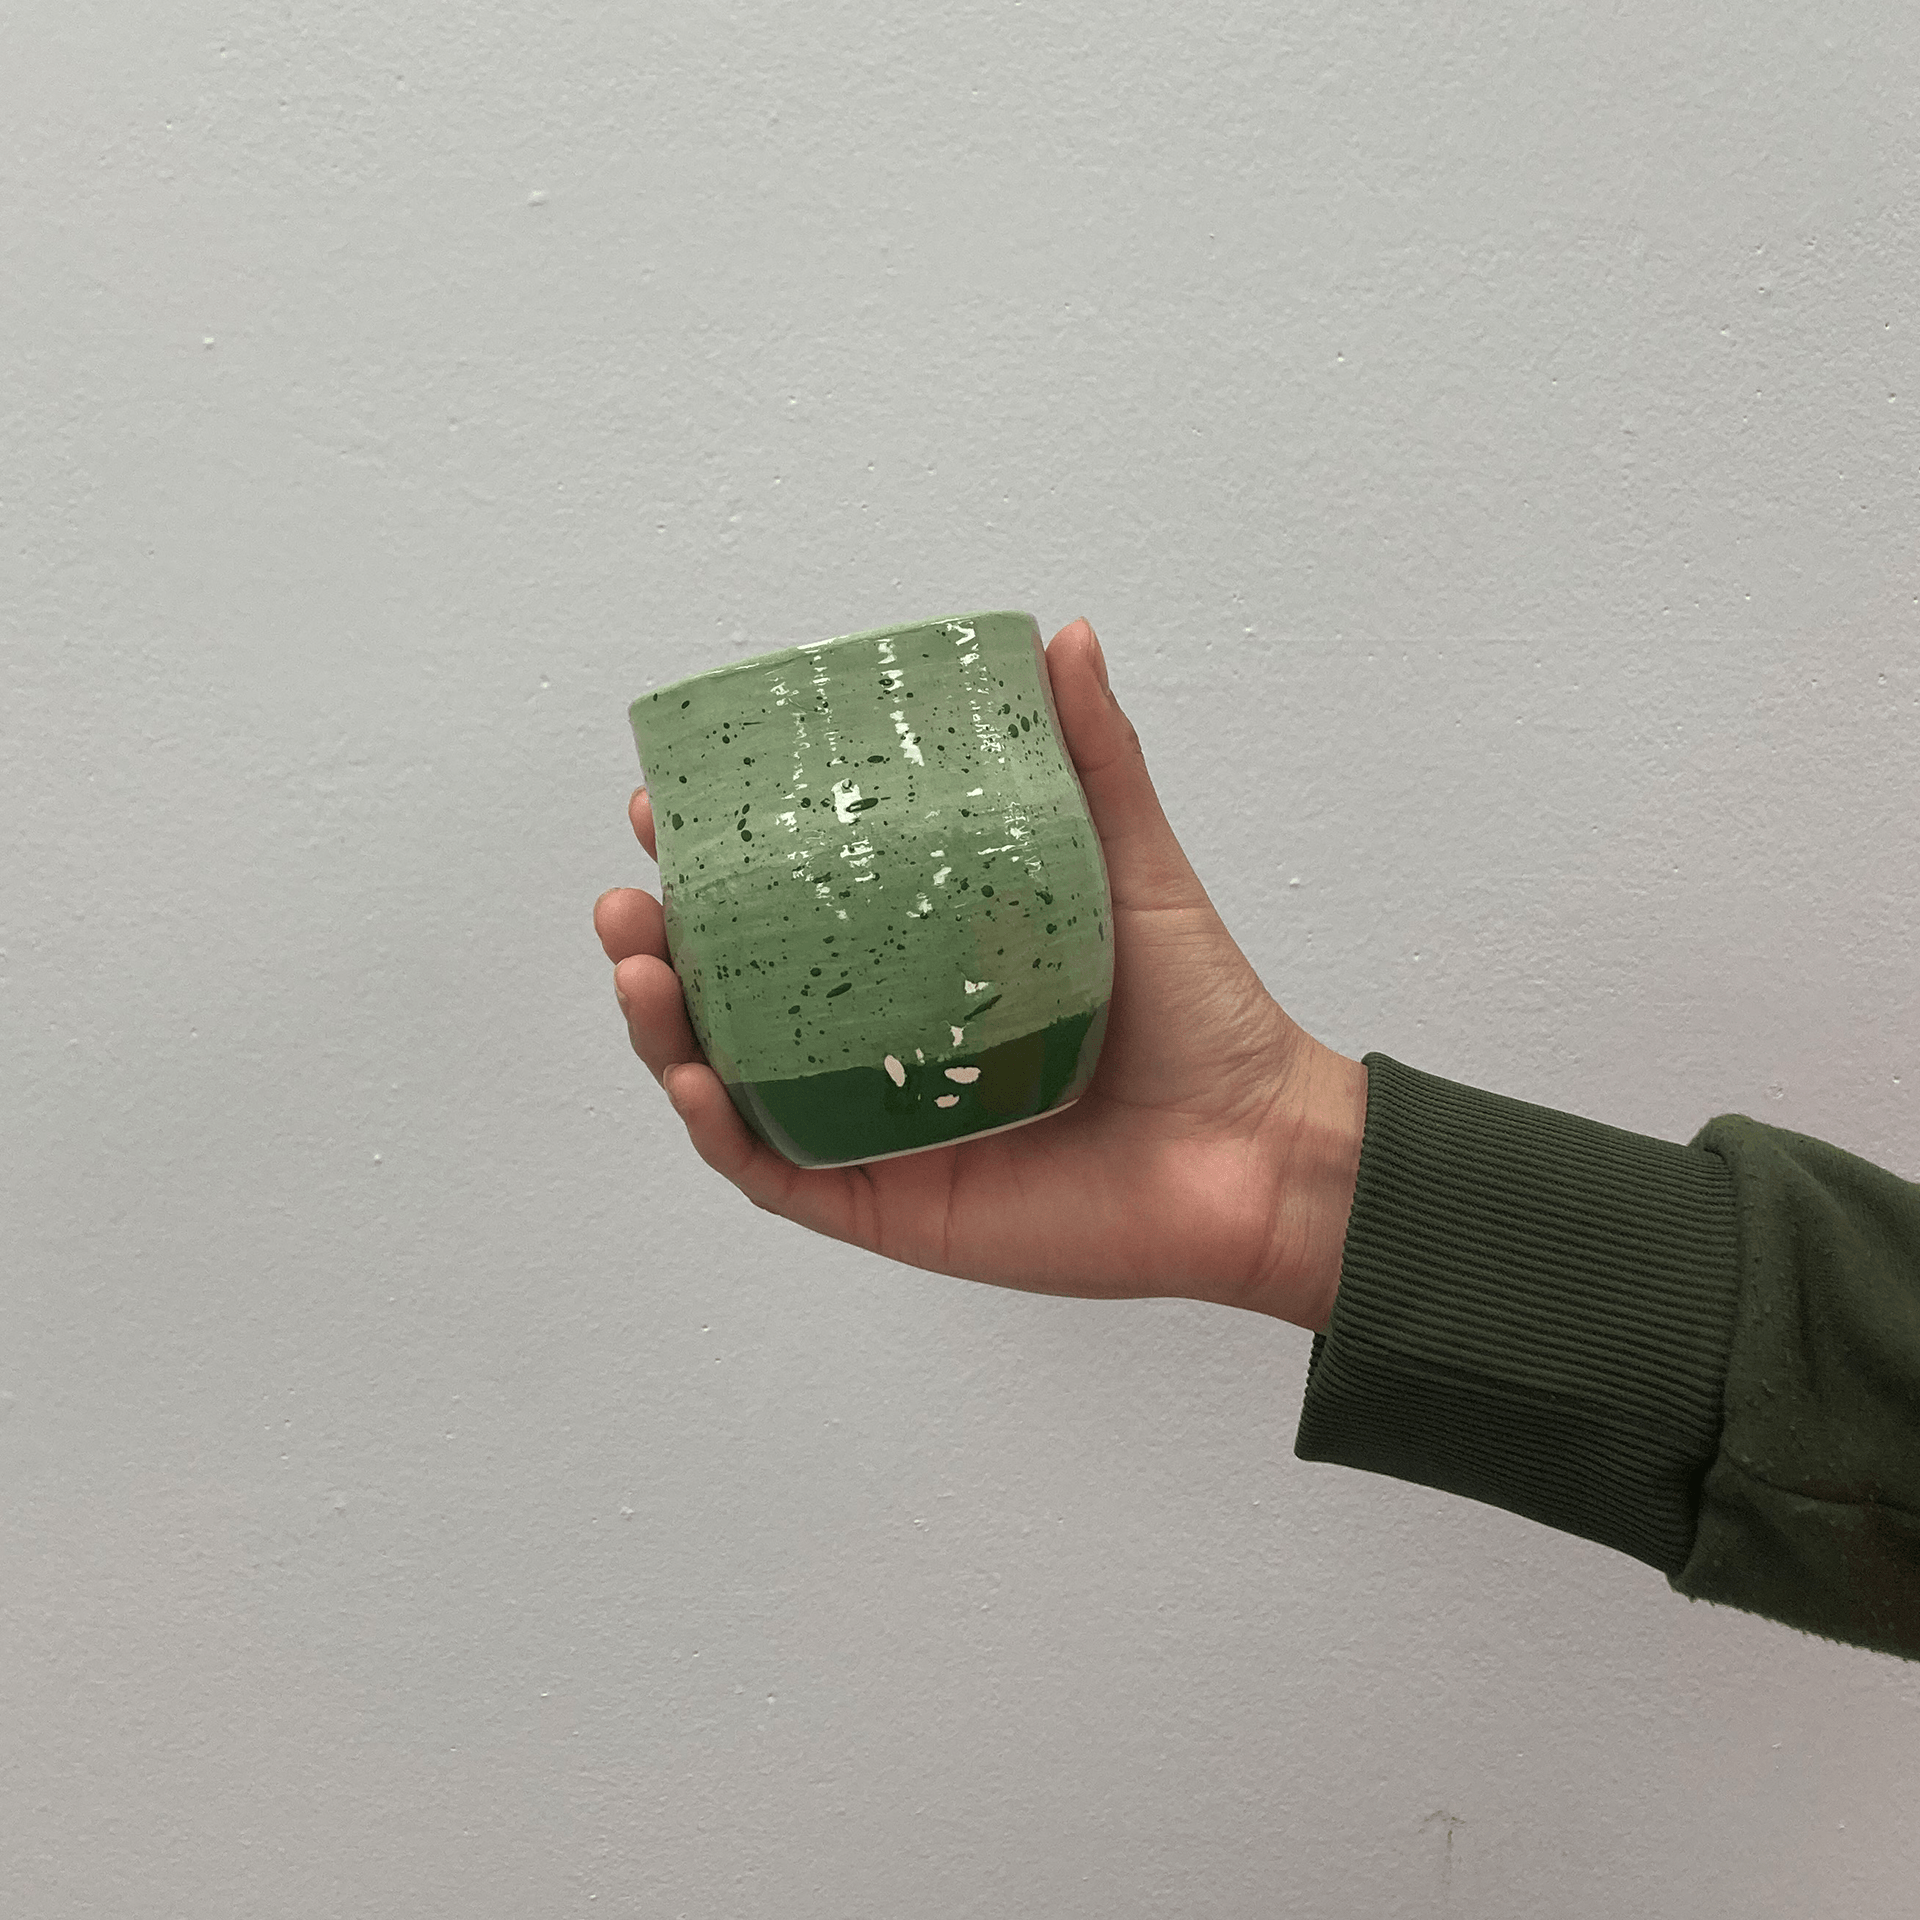 Green ceramic mug in front of white background